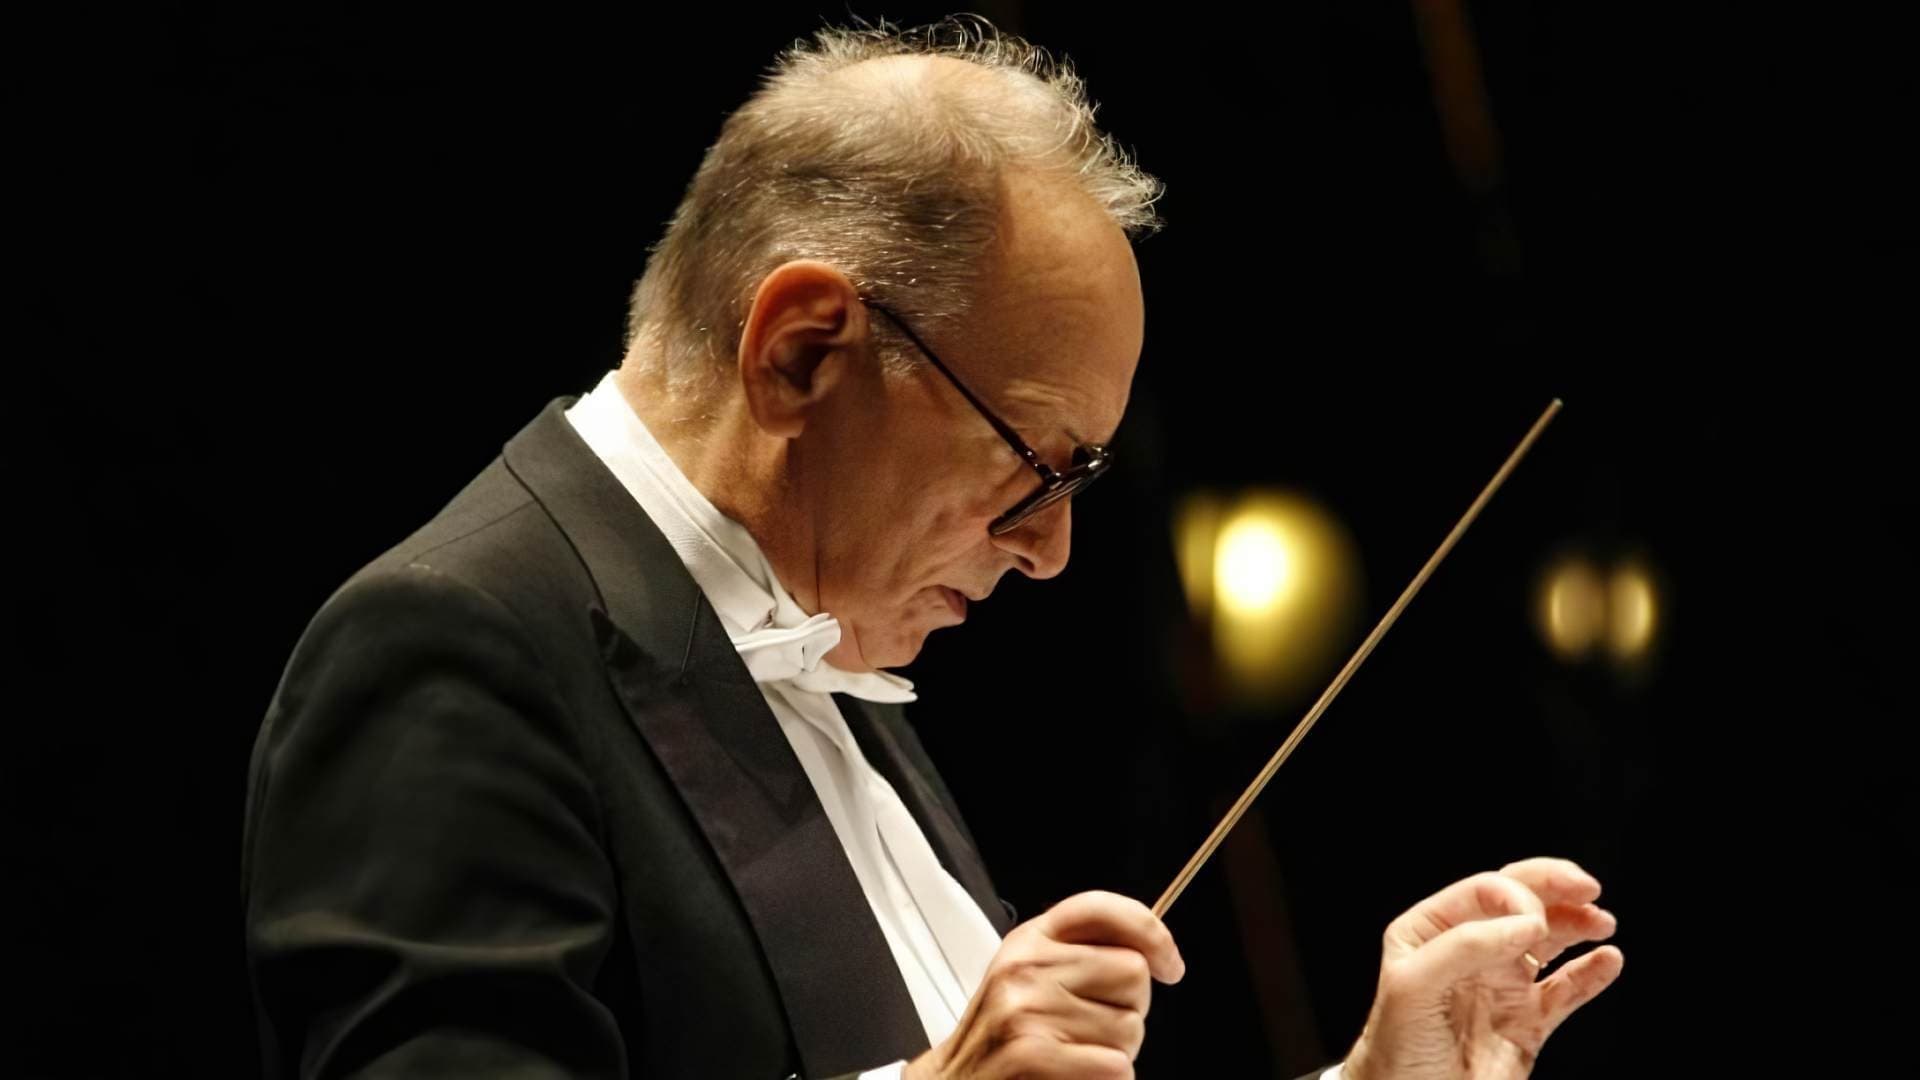 Morricone Conducts Morricone 2006 Soap2Day